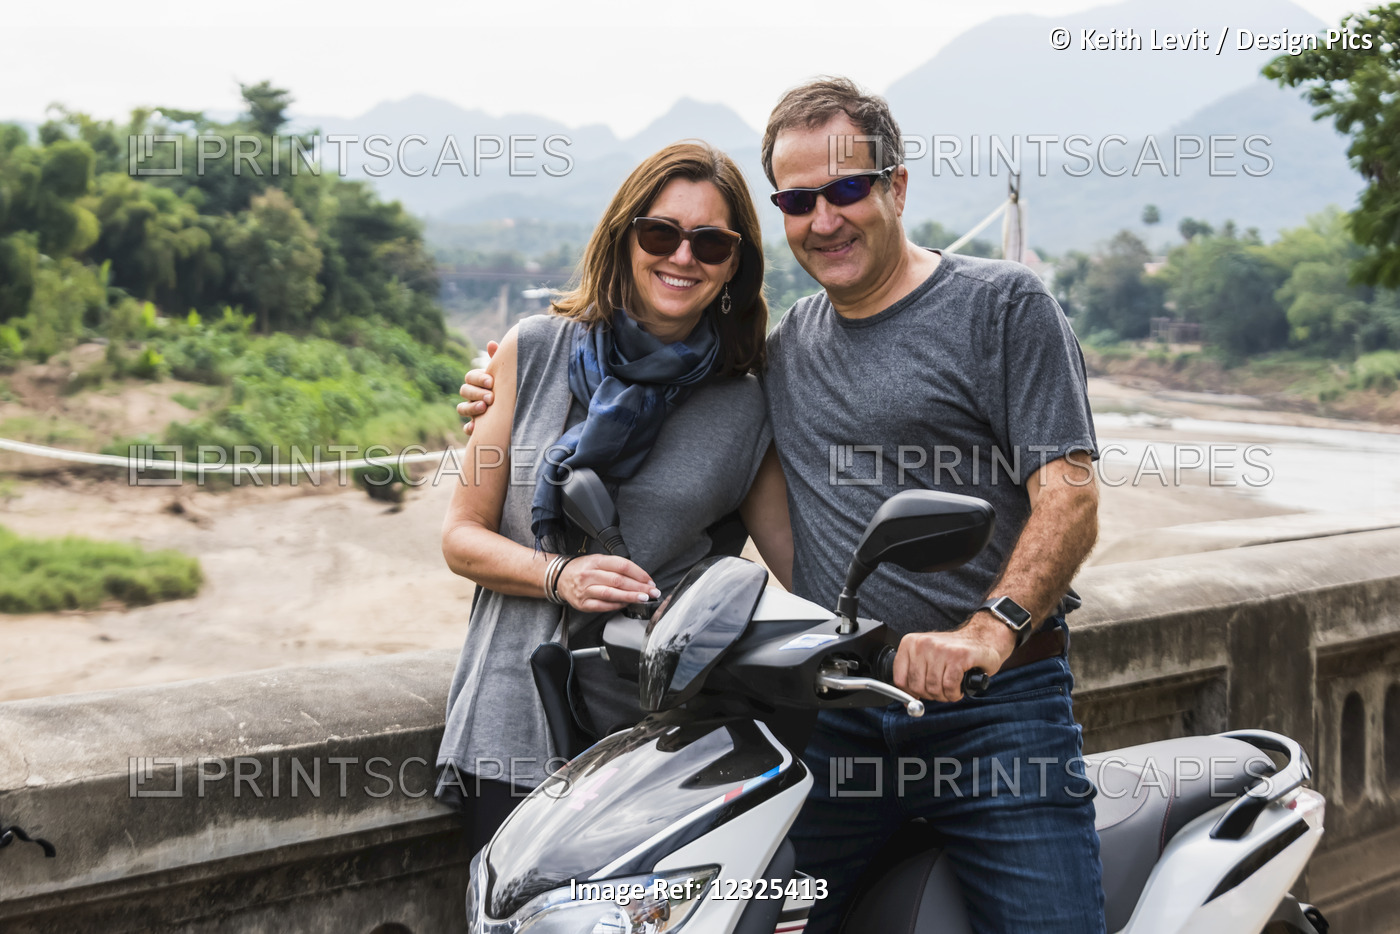 A Couple Stand Posing By A Motorcycle With A Mountainous Landscape In The ...